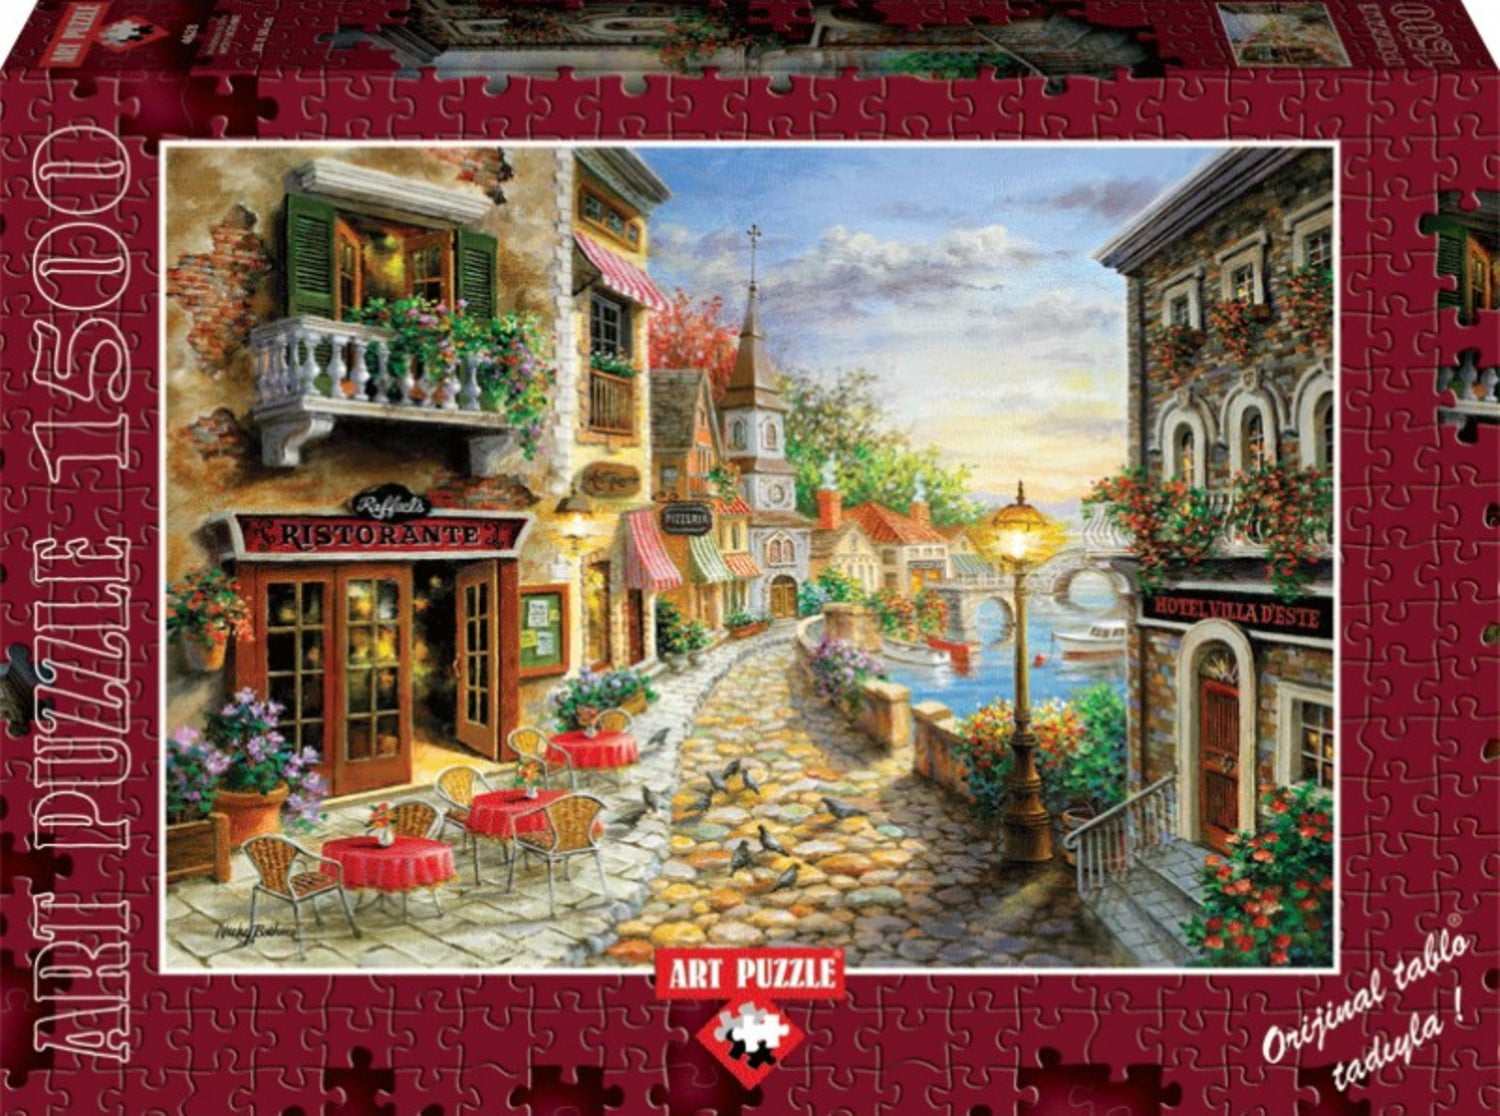 1,500 Pieces Jigsaw Puzzle Catalonia Spain by Wuundentoy 